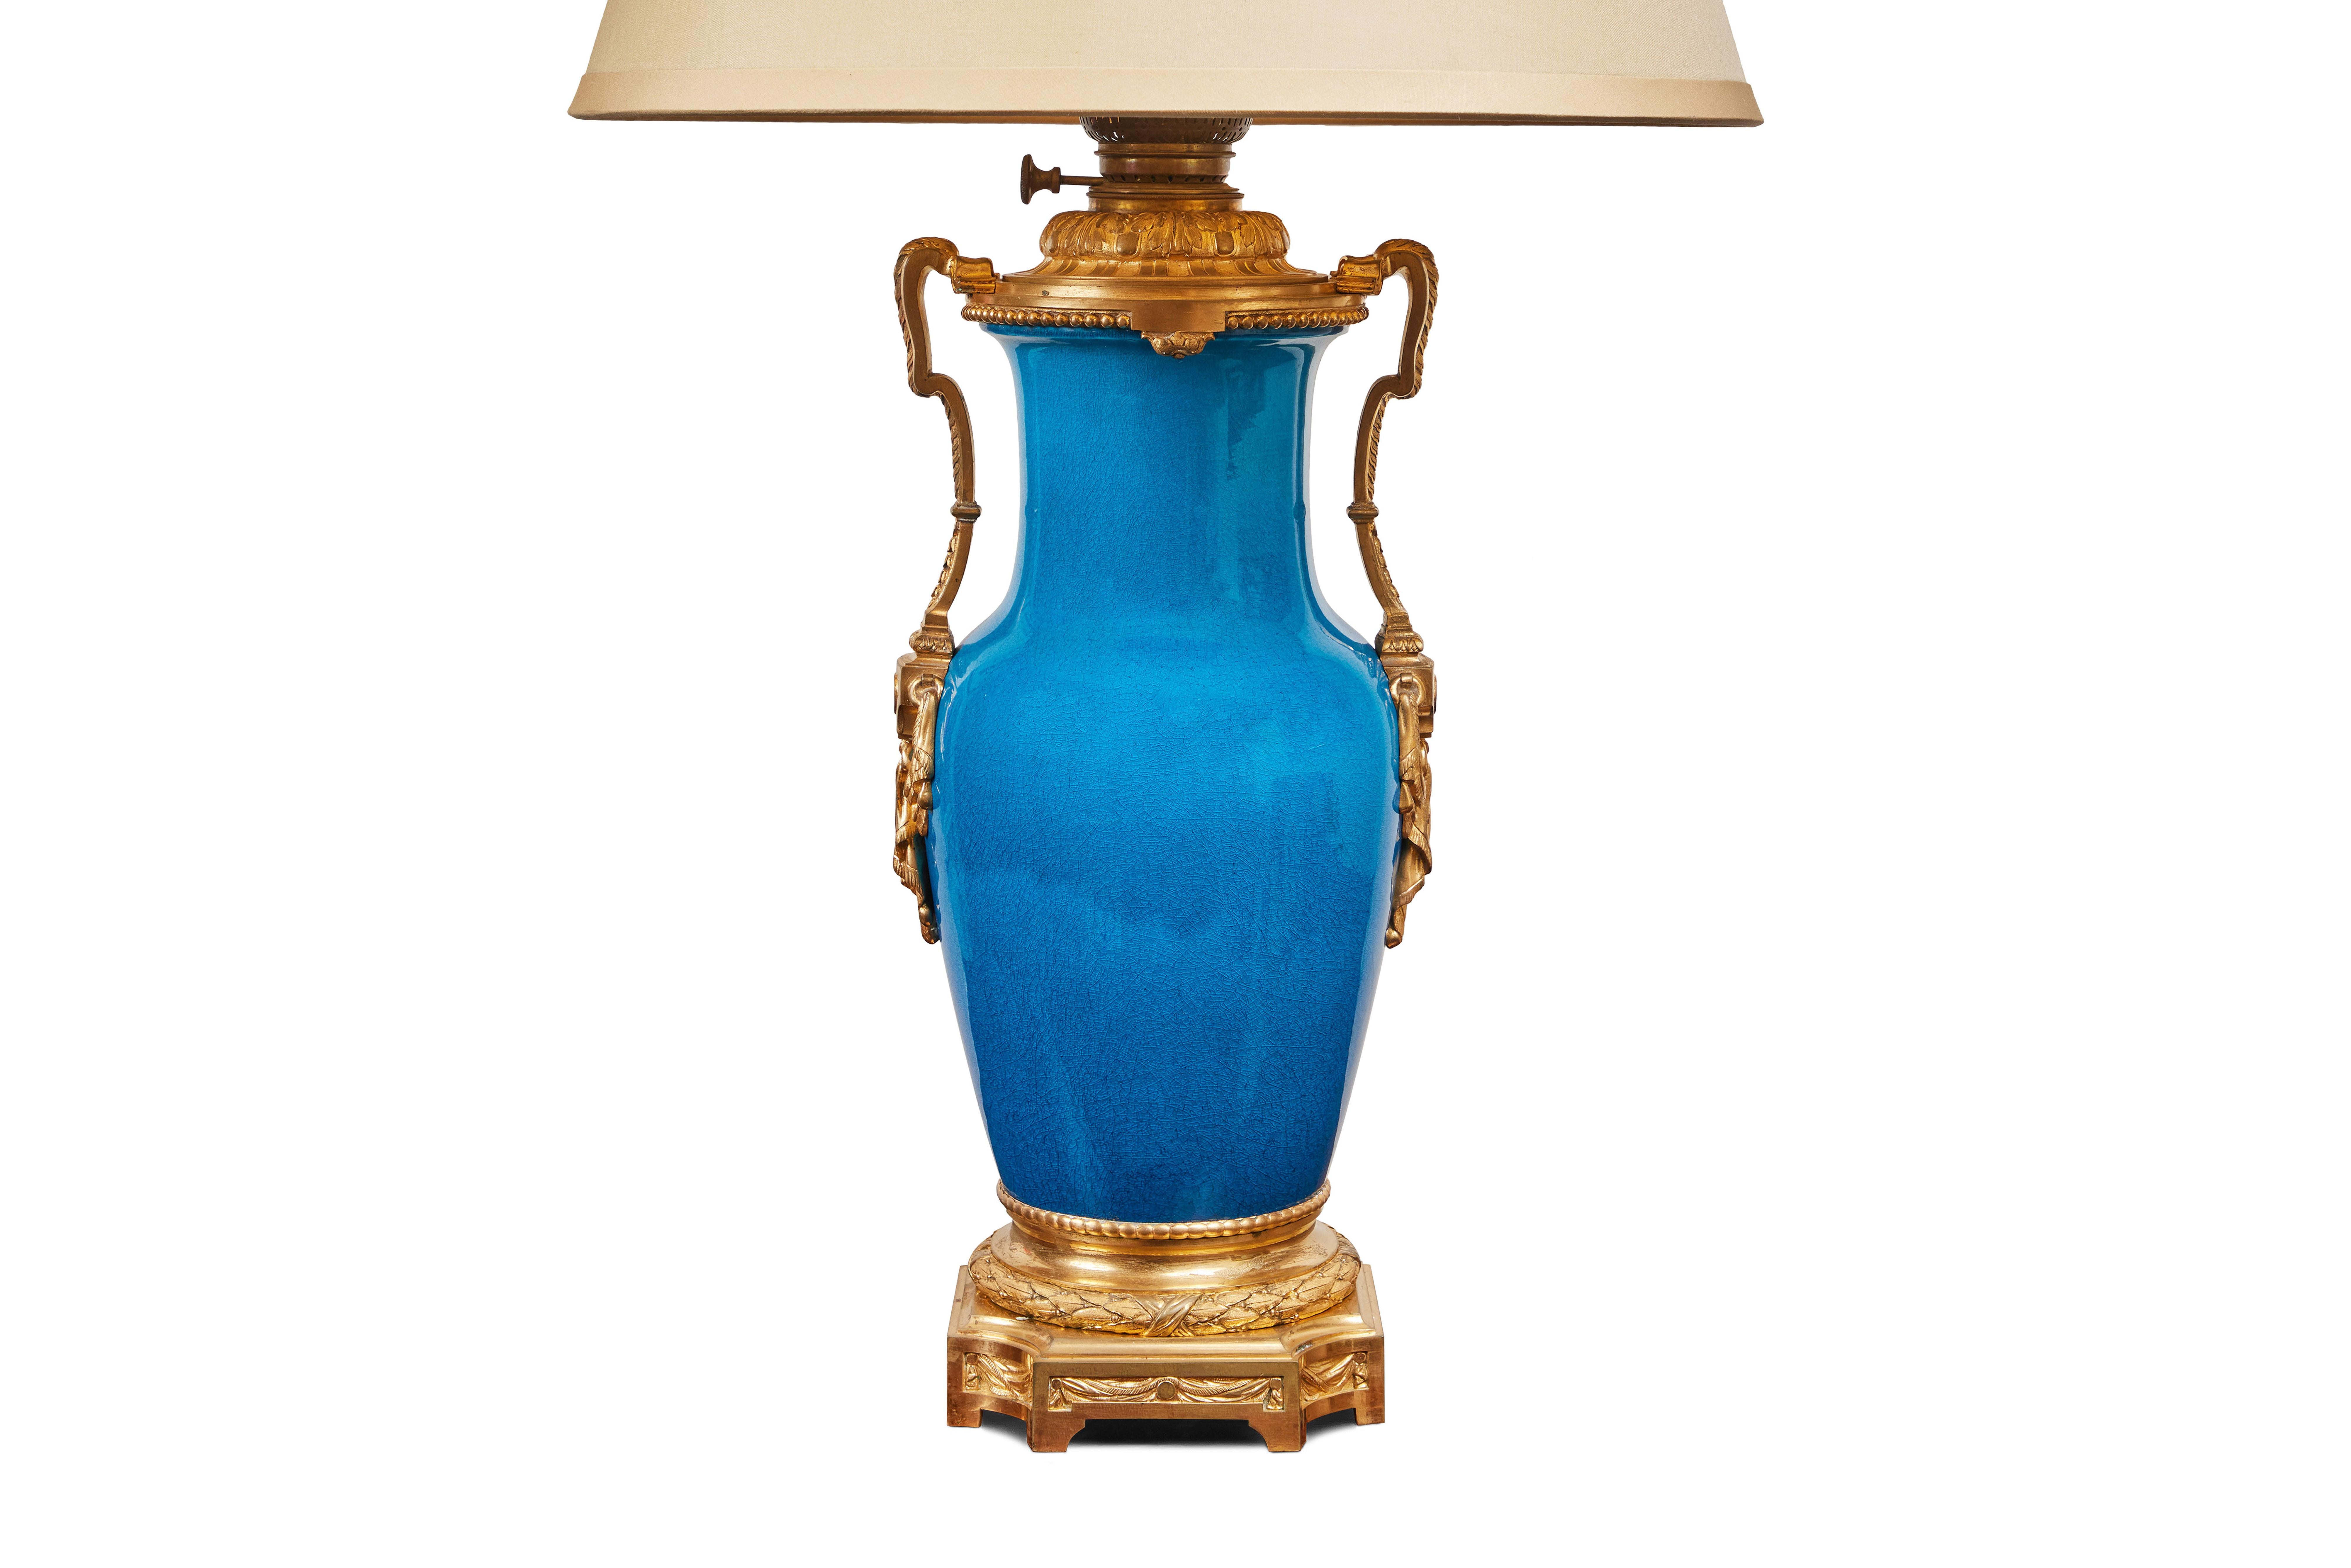 A vibrant, hand painted and glazed, Louis XIV style, French porcelain vase with brilliant, gilt bronze mounts. During the 19th c. the piece was made into a gas lamp but is now wired for U.S. current. Note, the height of the lamp is adjustable.